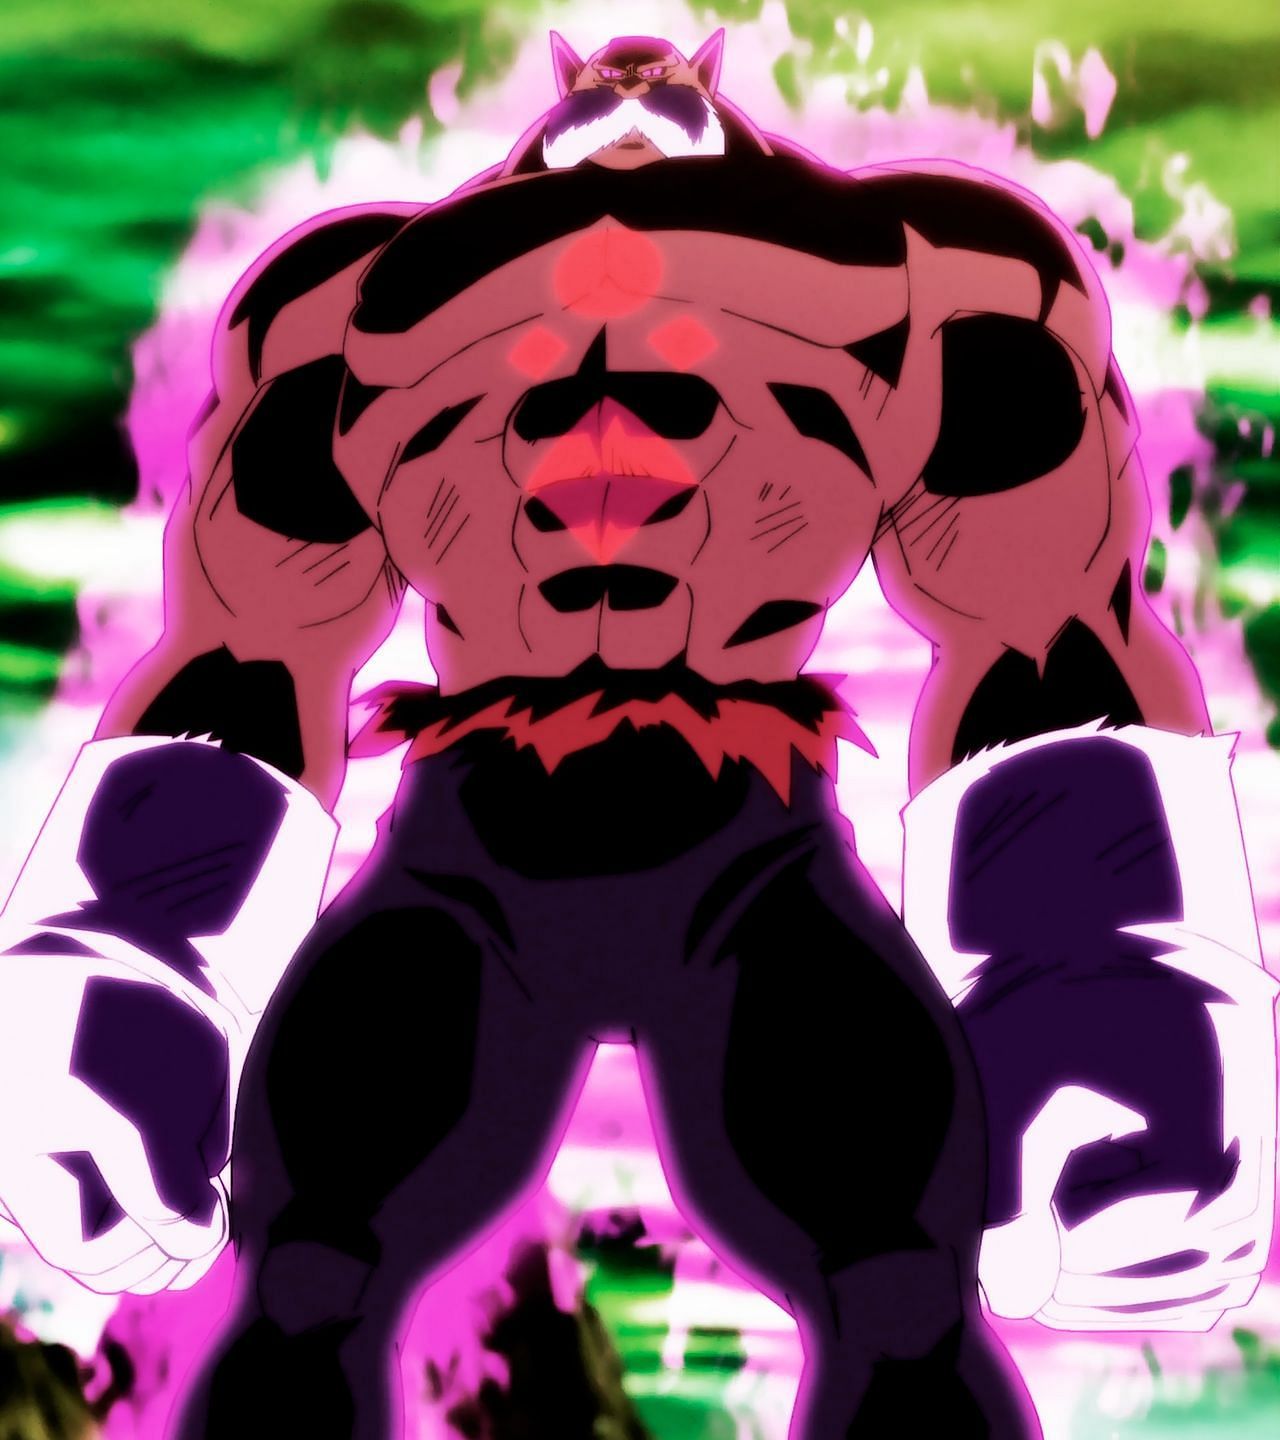 Toppo in his Destroyer form as seen in the Dragon Ball Super anime (Image via Toei Animation)